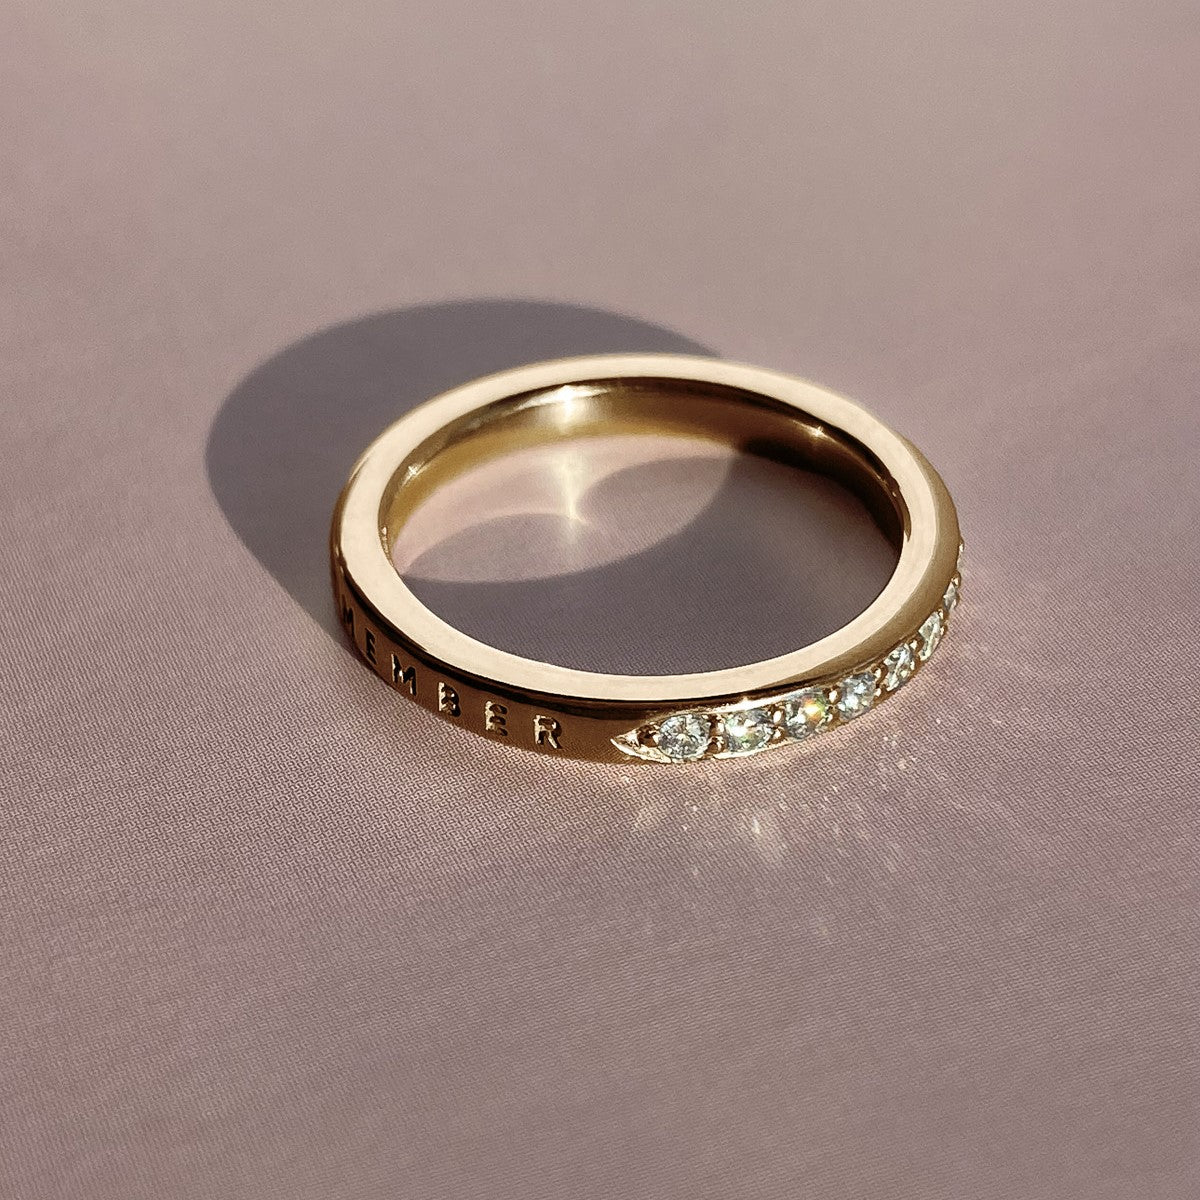 RING "MEMORIES" WITH A HALF CIRCLE OF WHITE DIAMOND | GOLD